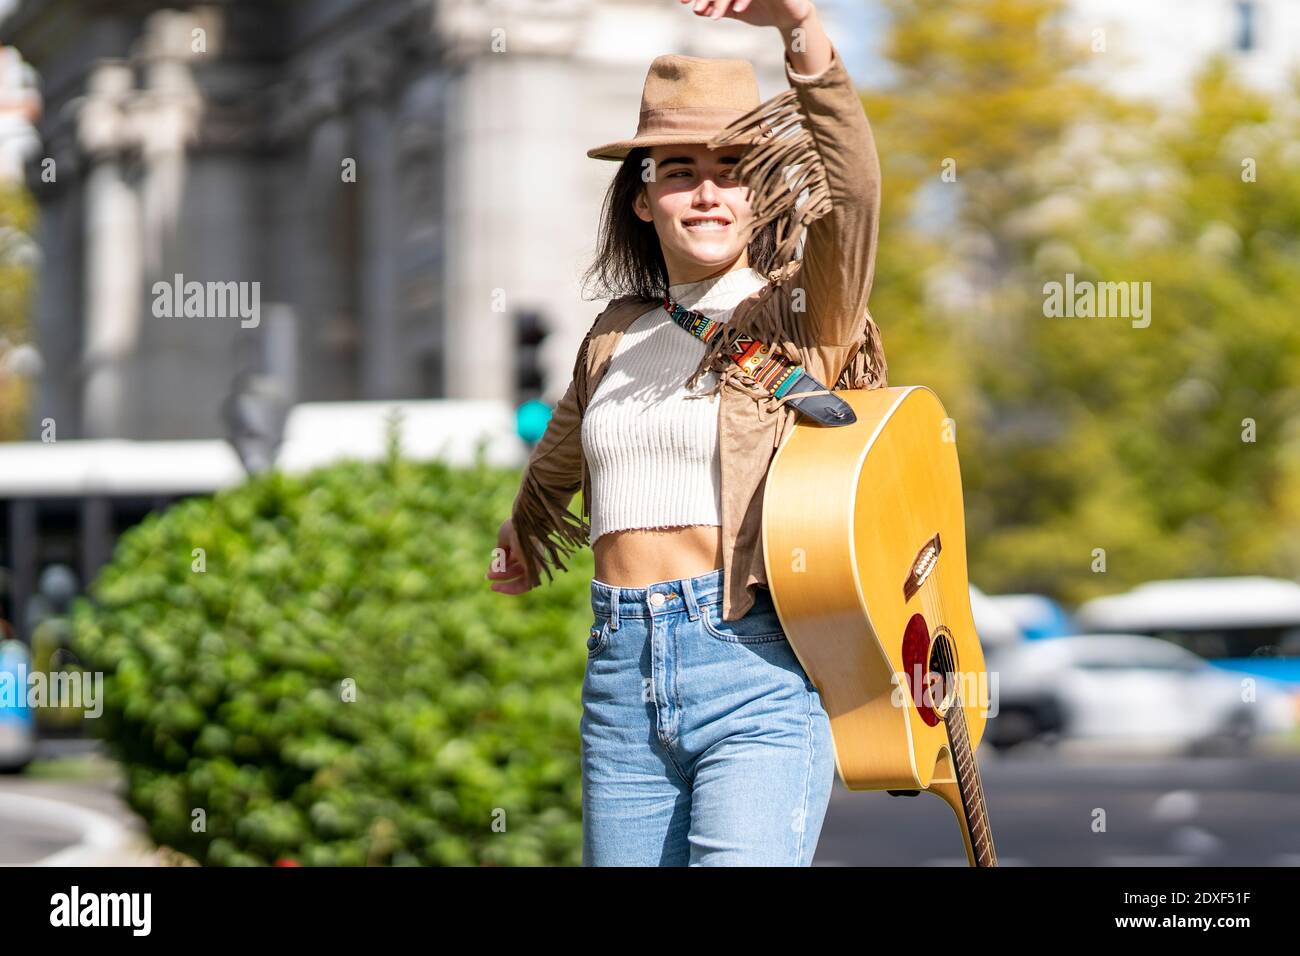 Young woman with hand raised on street in city during sunny day Stock Photo